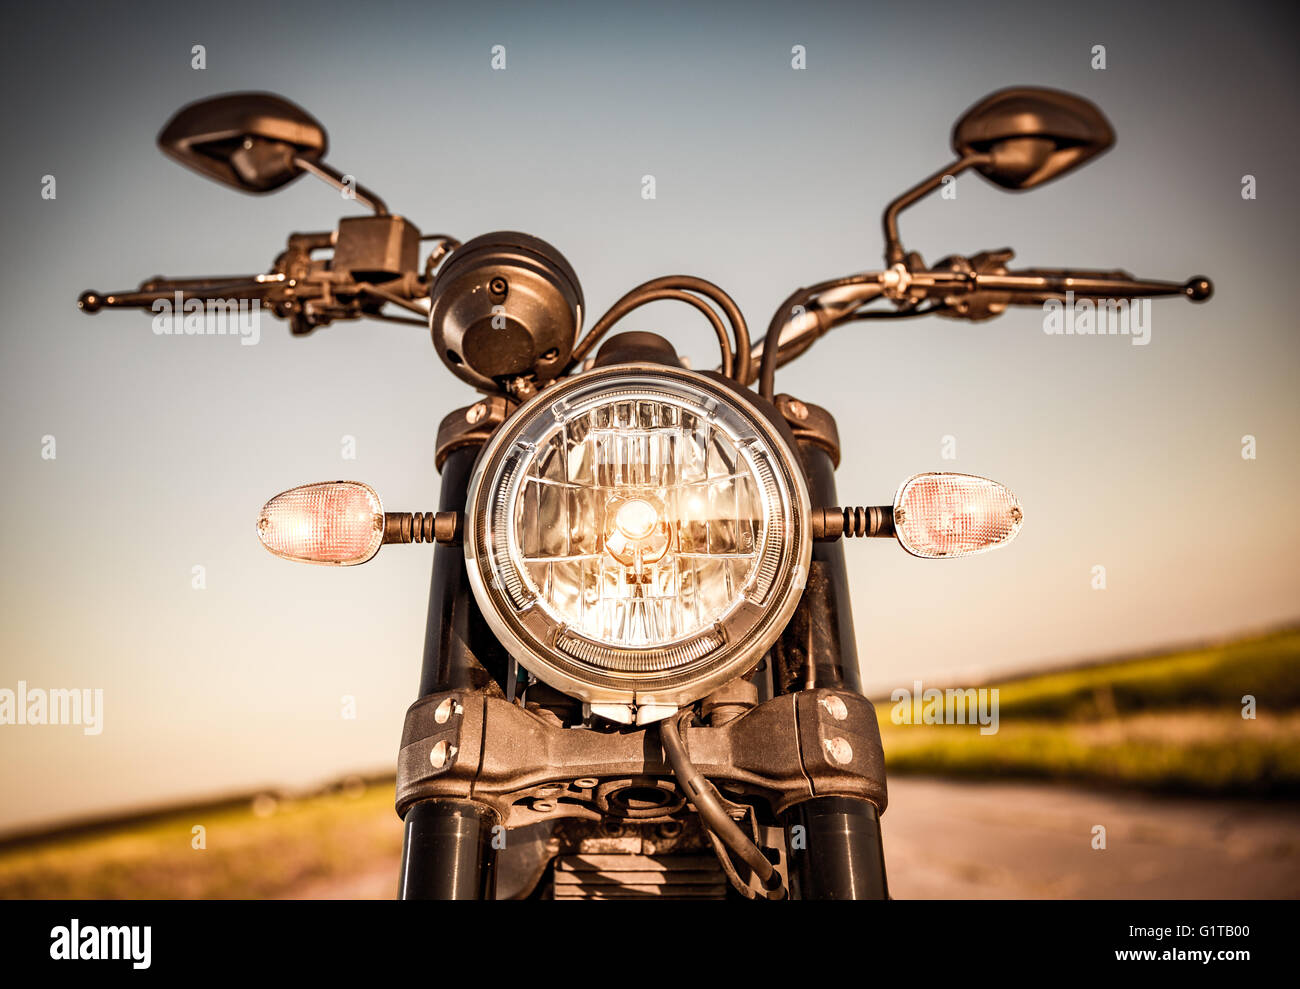 Motorcycle on the road motorcycle headlamp closeup Stock Photo